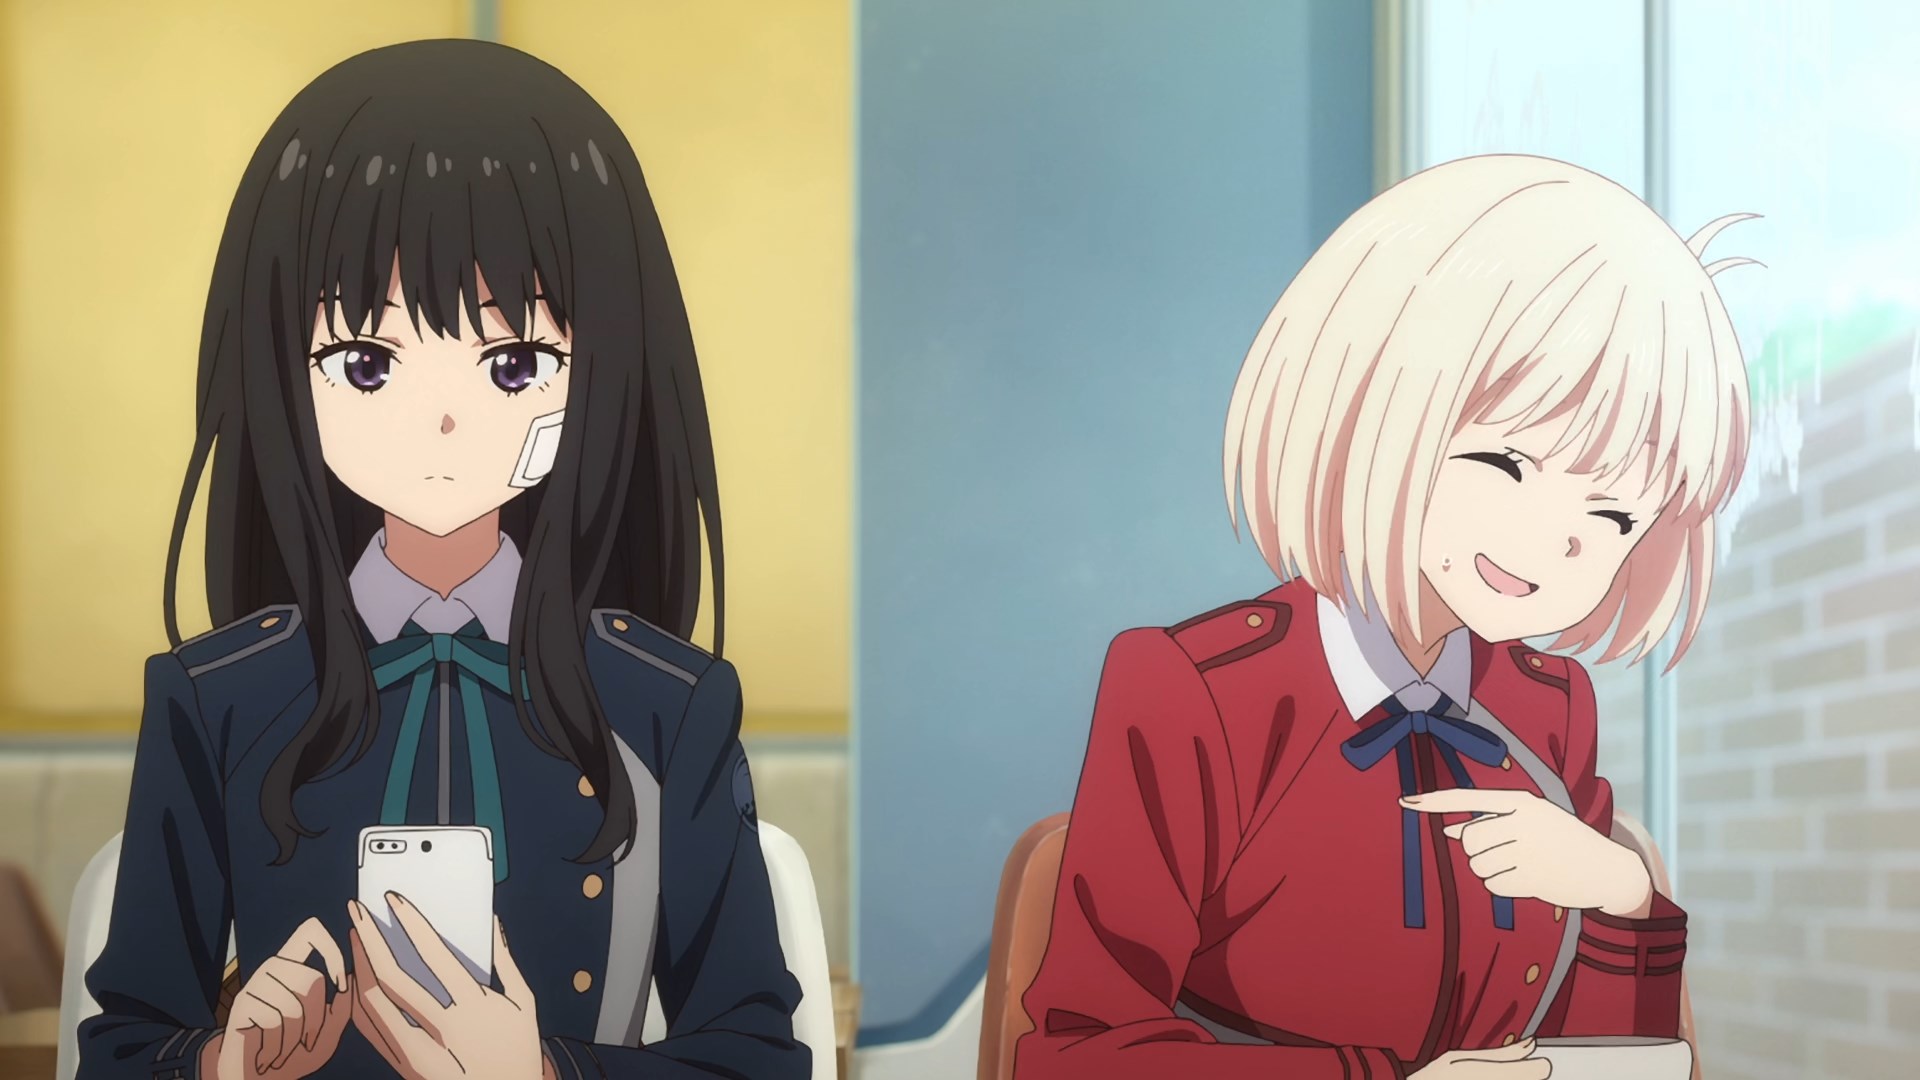 A calm black haired school girl is looking at her mobile while a short haired, blonde girl is laughing awkwardly and pointing at her